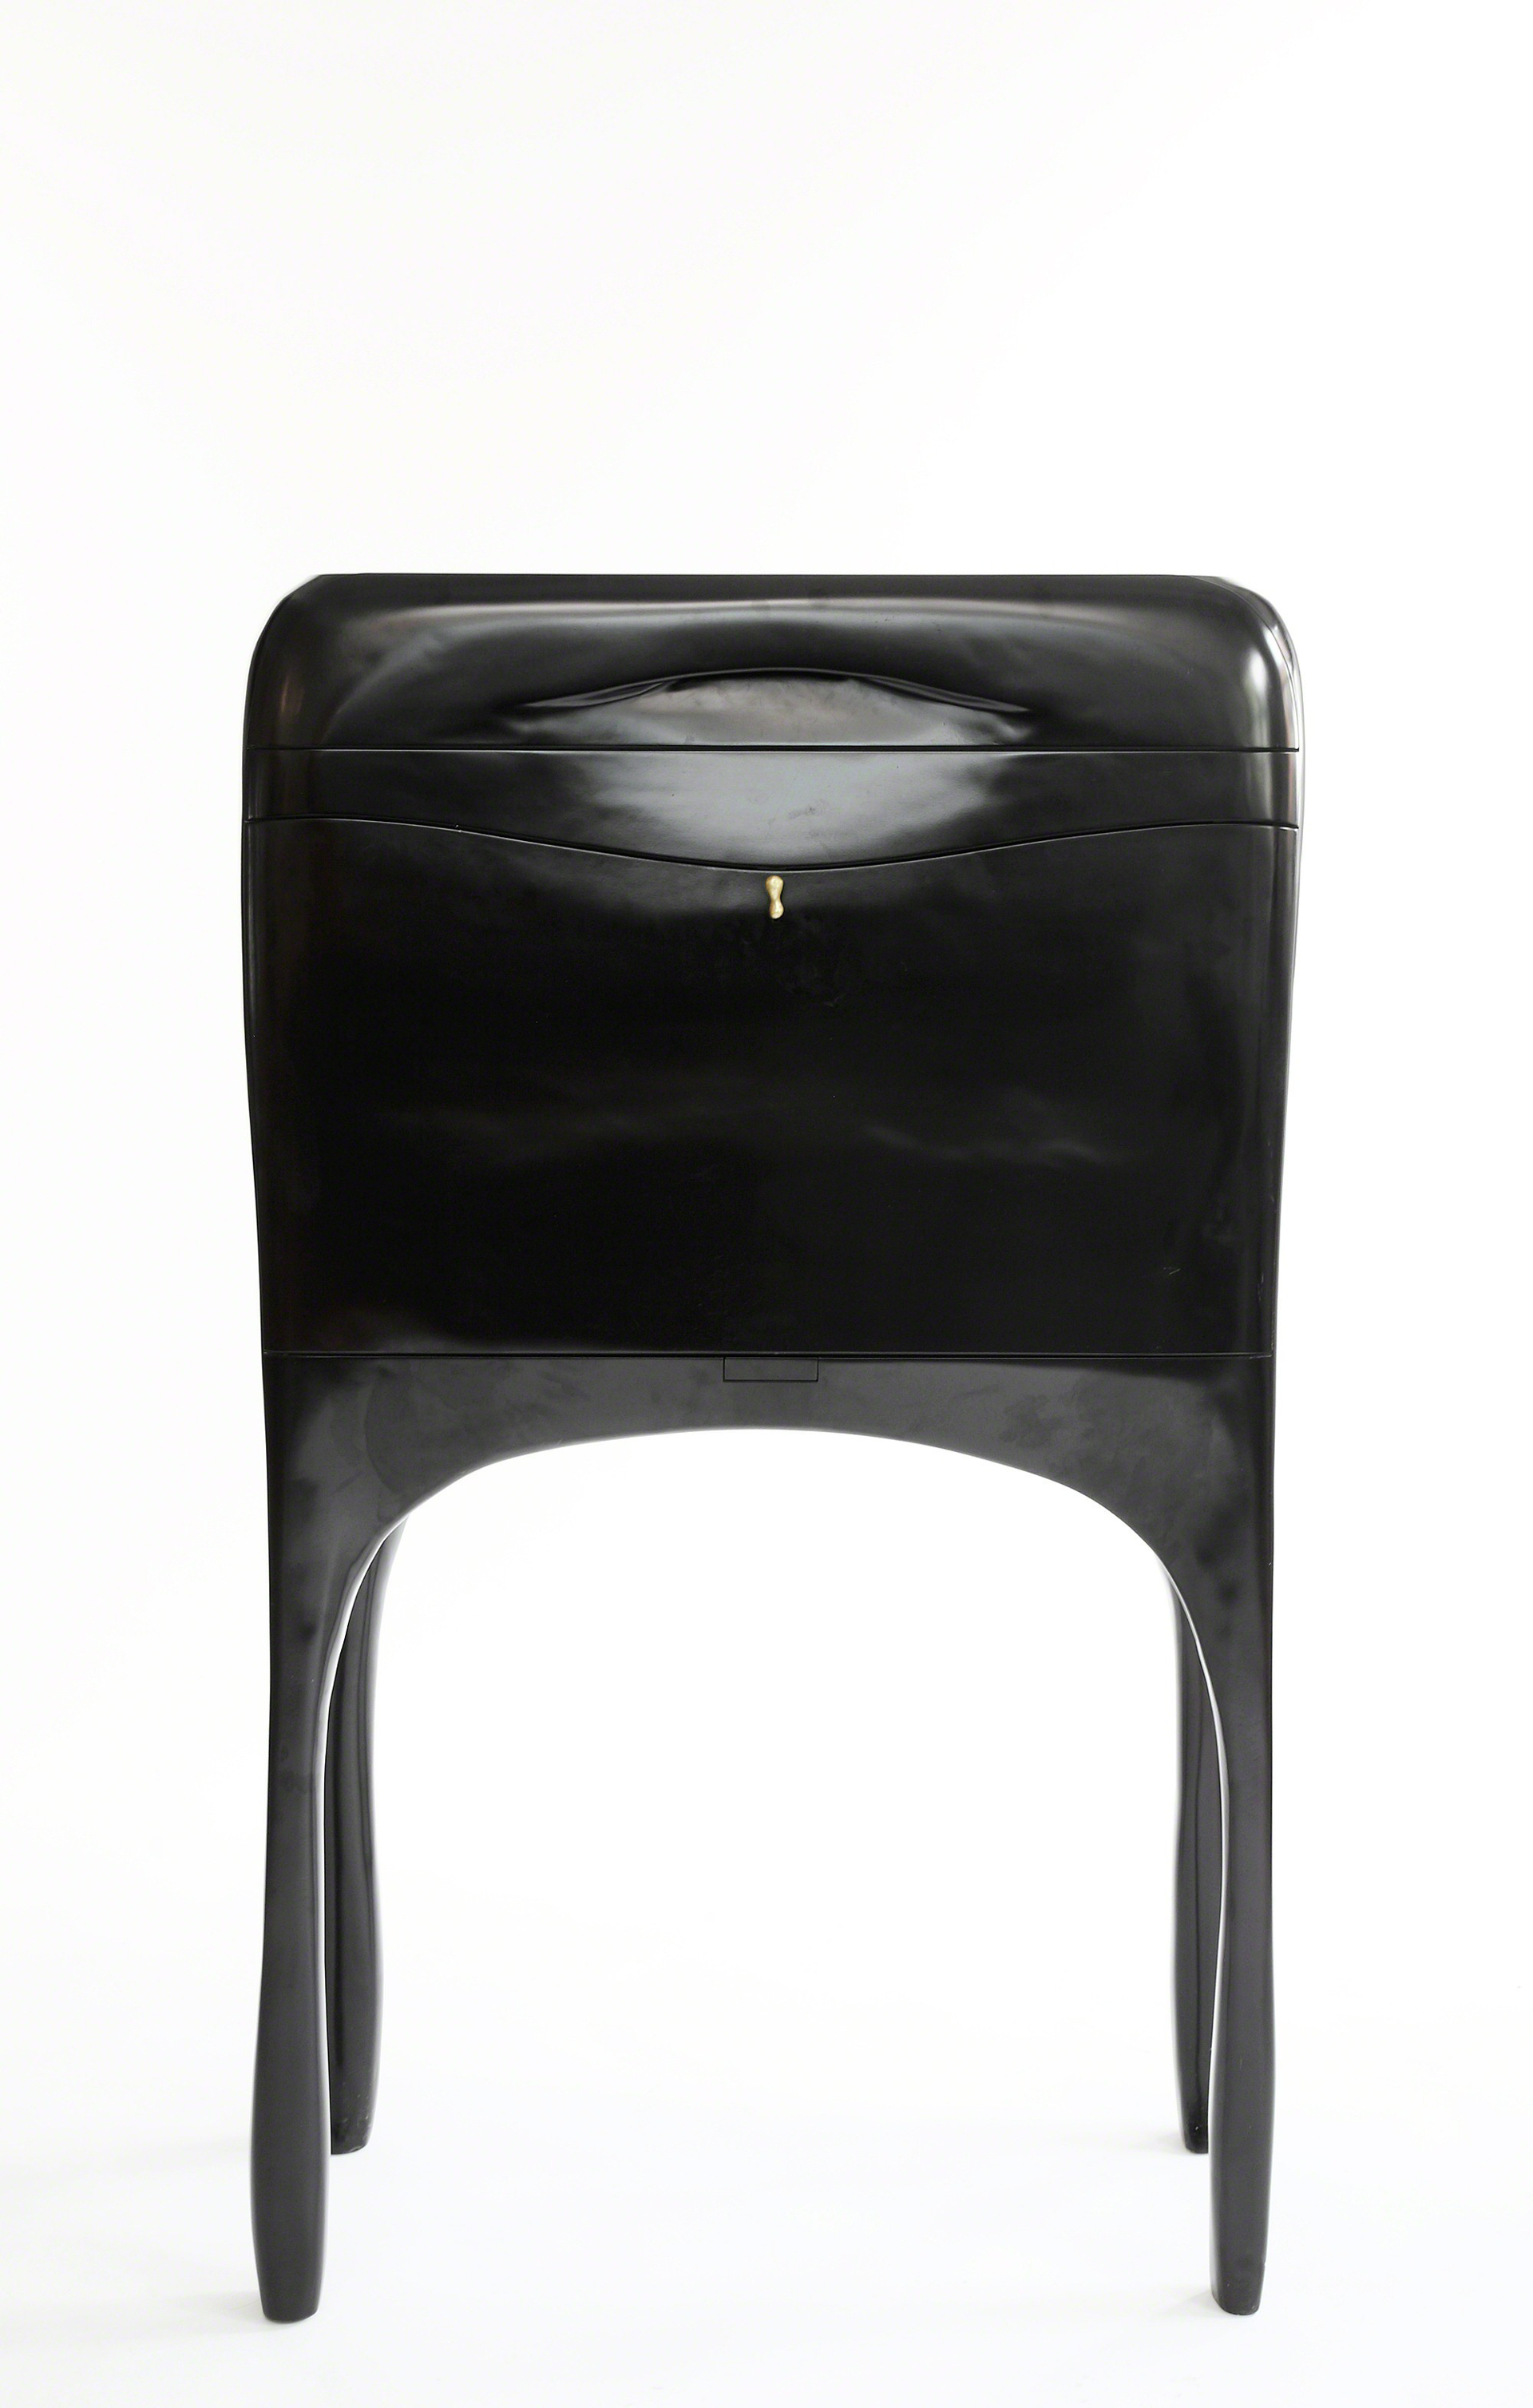 "Toro" Cabinet by Jacques Jarrige